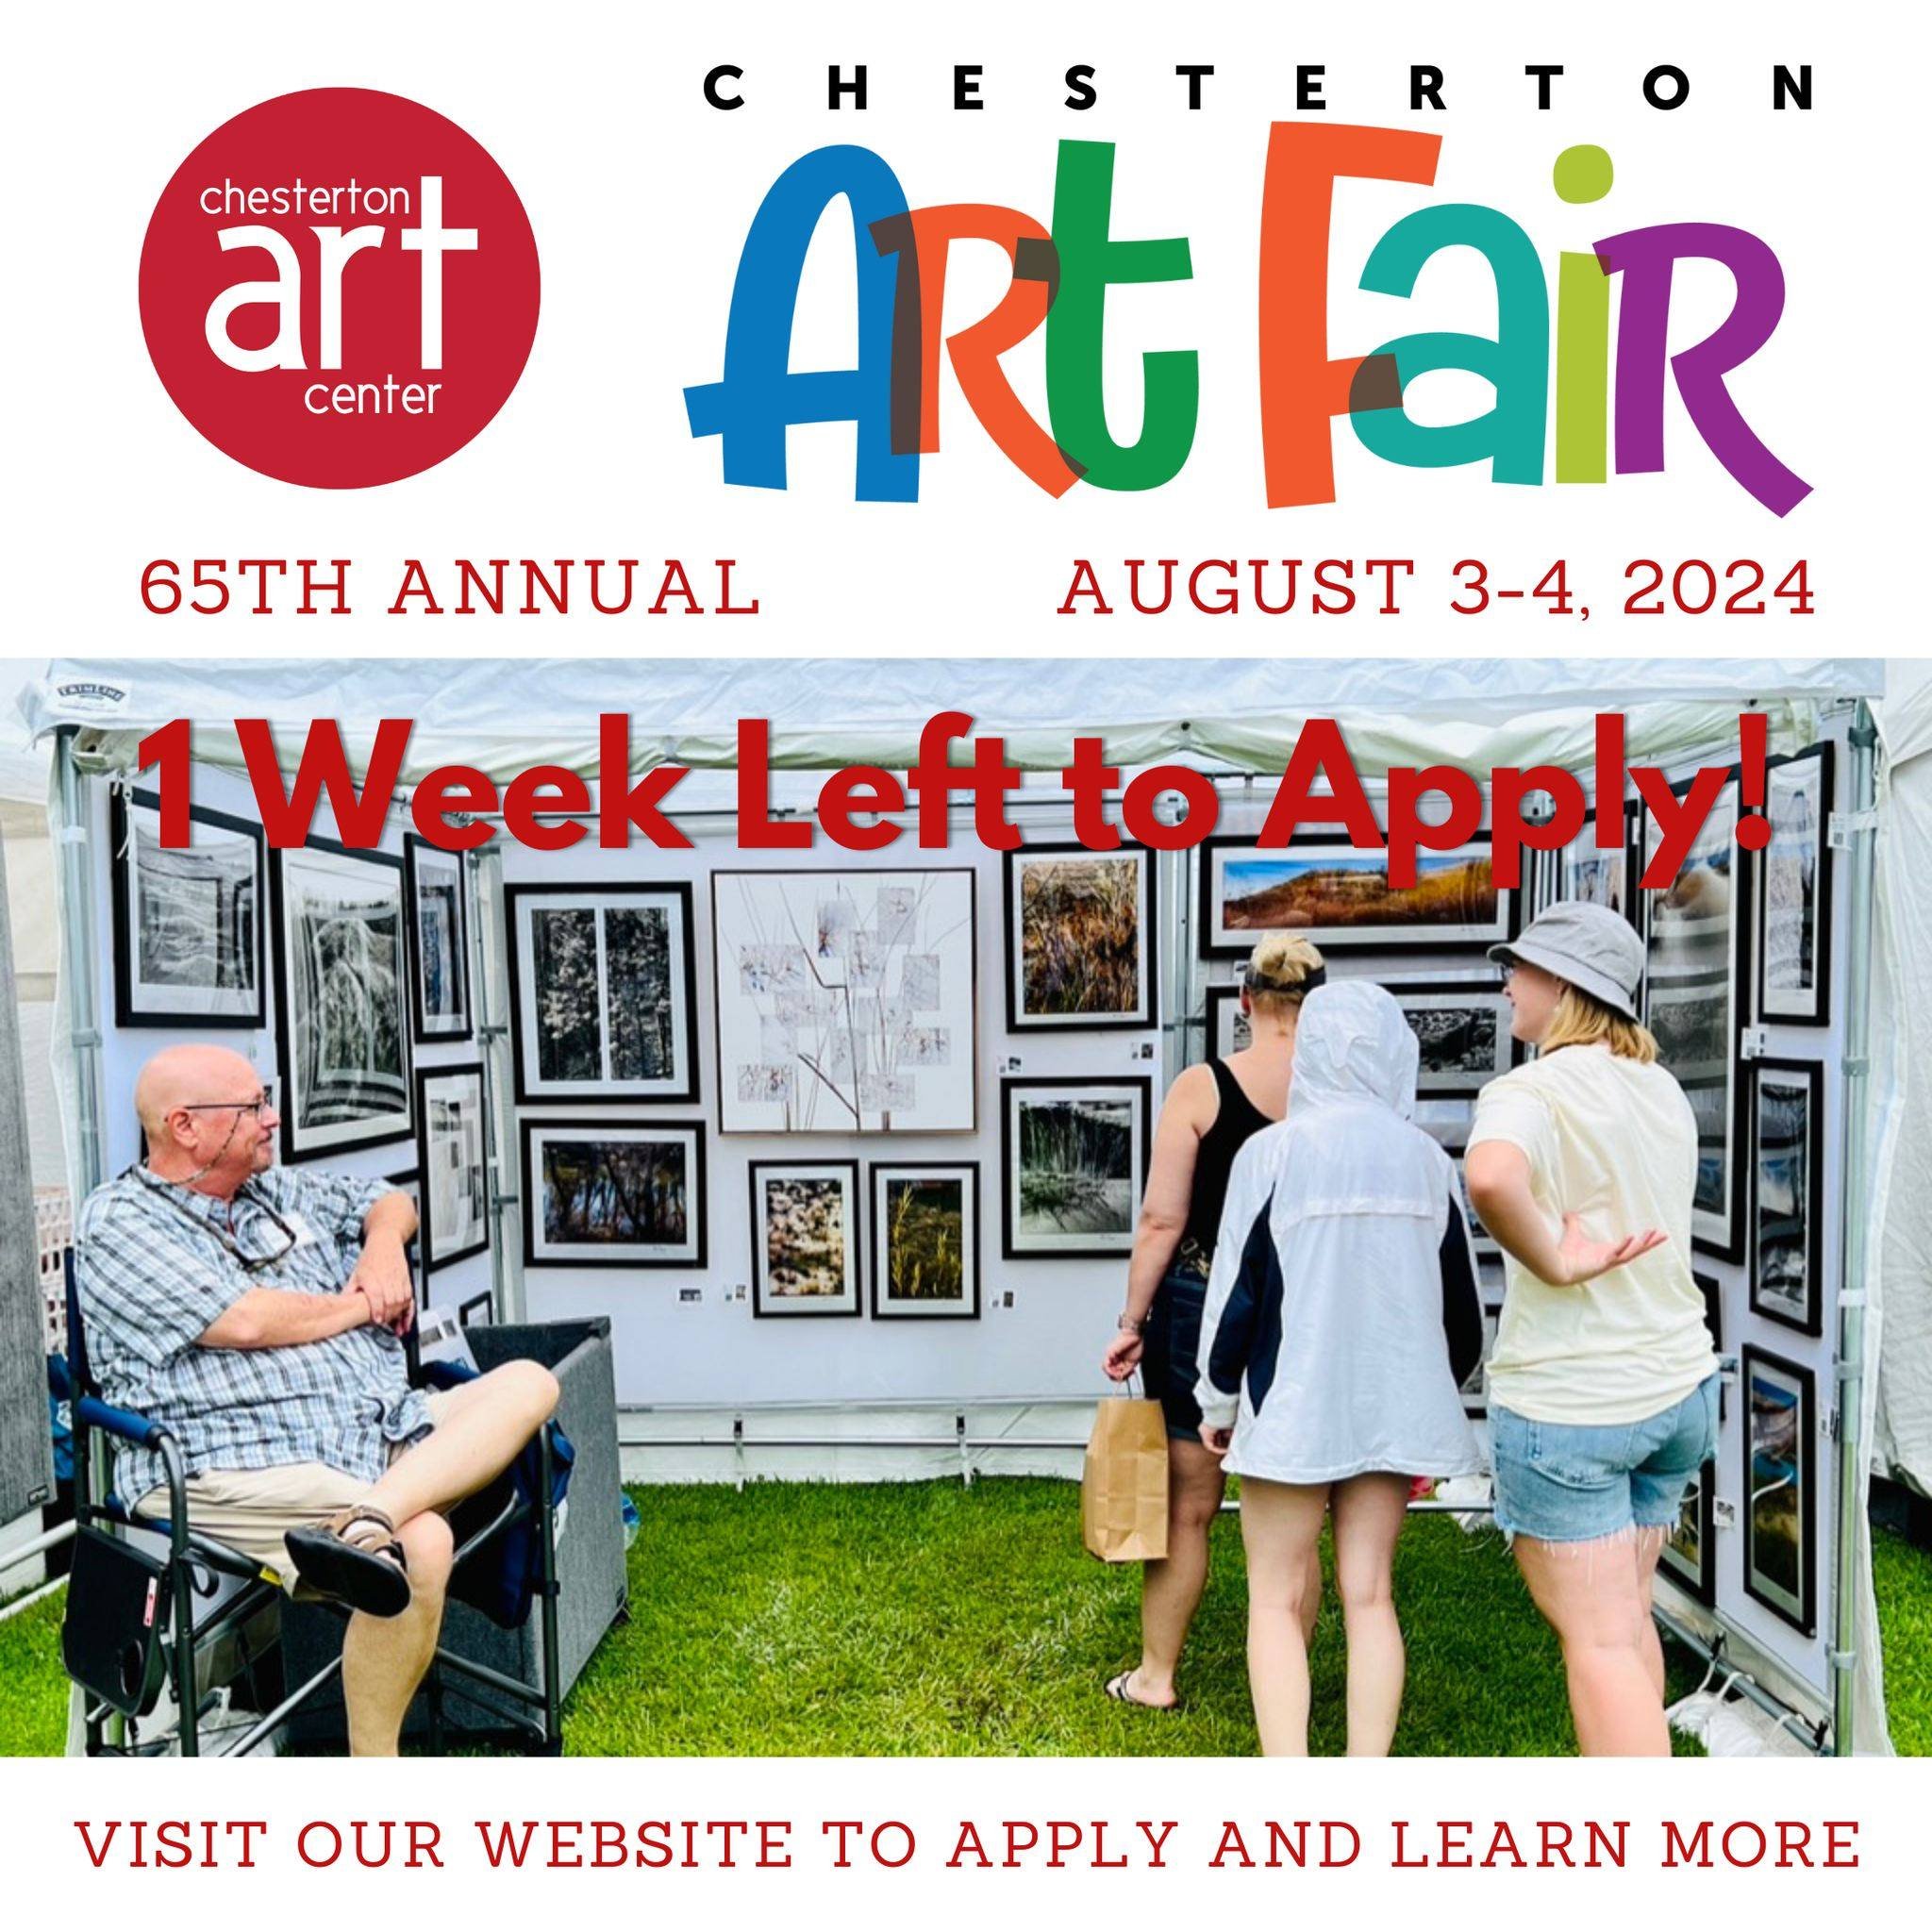 ONE WEEK LEFT TO APPLY! We have enjoyed seeing all the lovely submissions so far, and would love to see more! Submit your Chesterton Art Fair artist applications to be a part of this wonderful summertime event that supports artists and art in the com